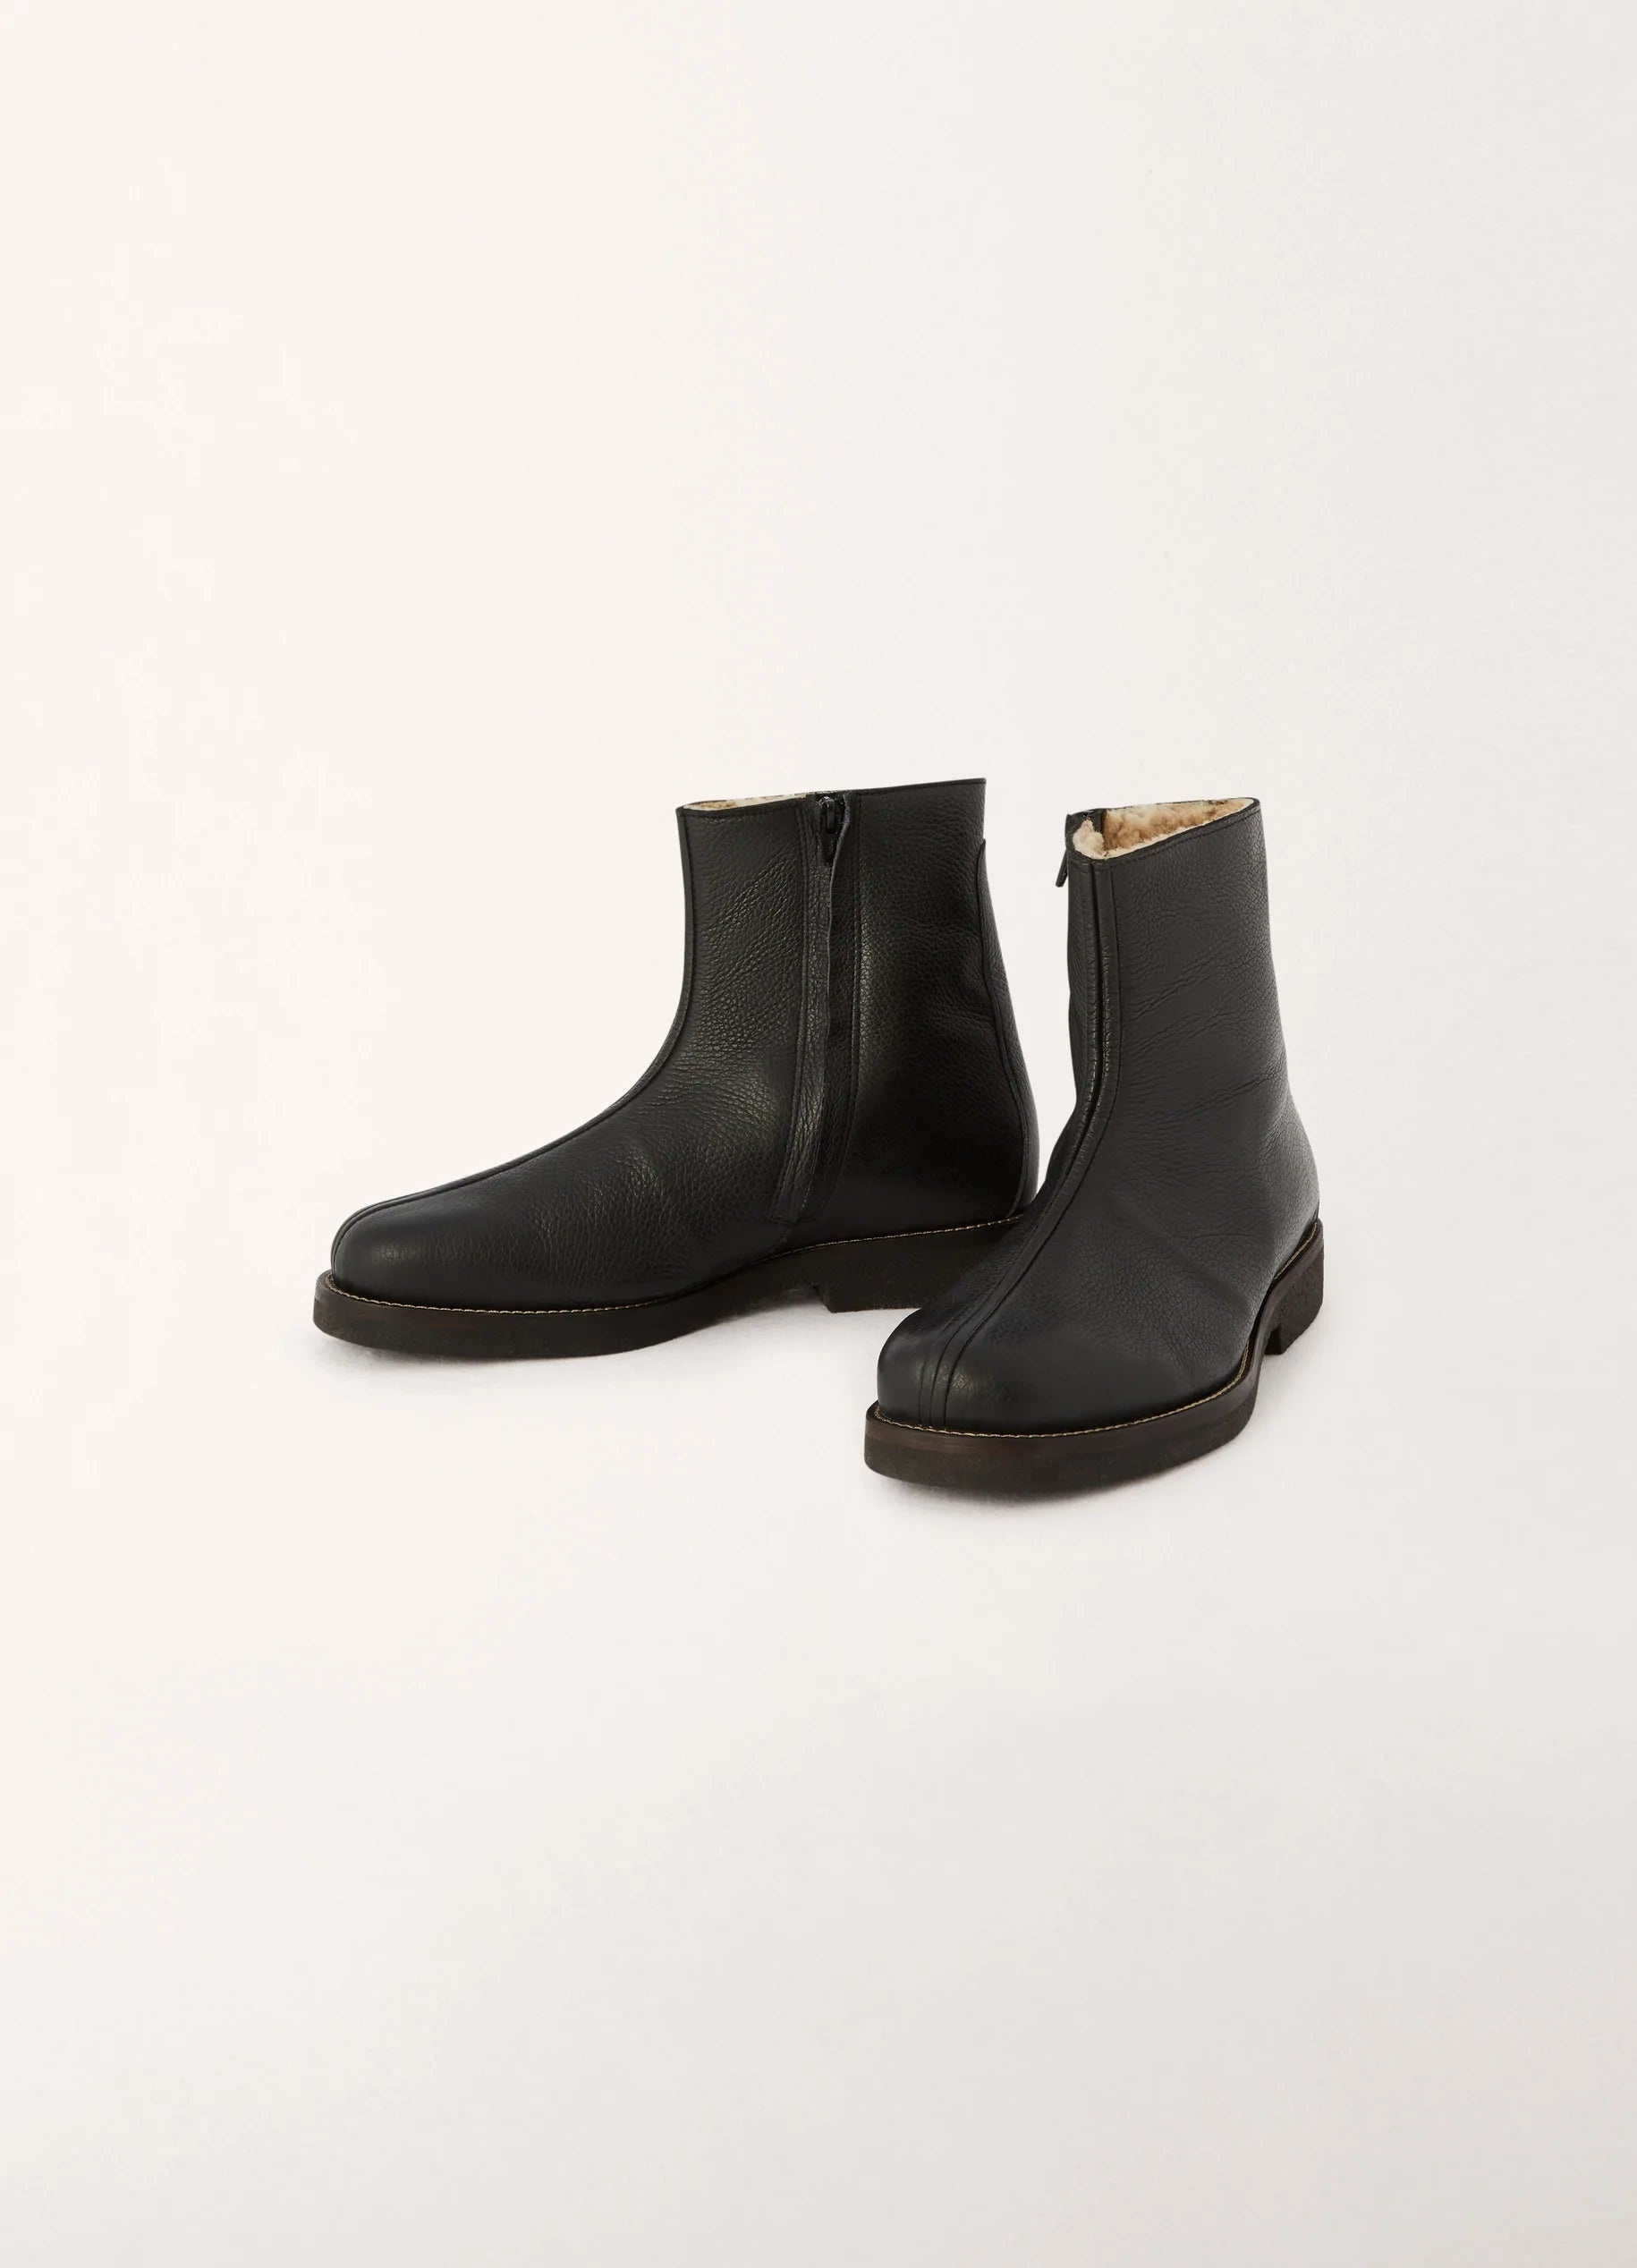 BOOTS WITH SHEARLING
GRAINE CALF LTH - 2